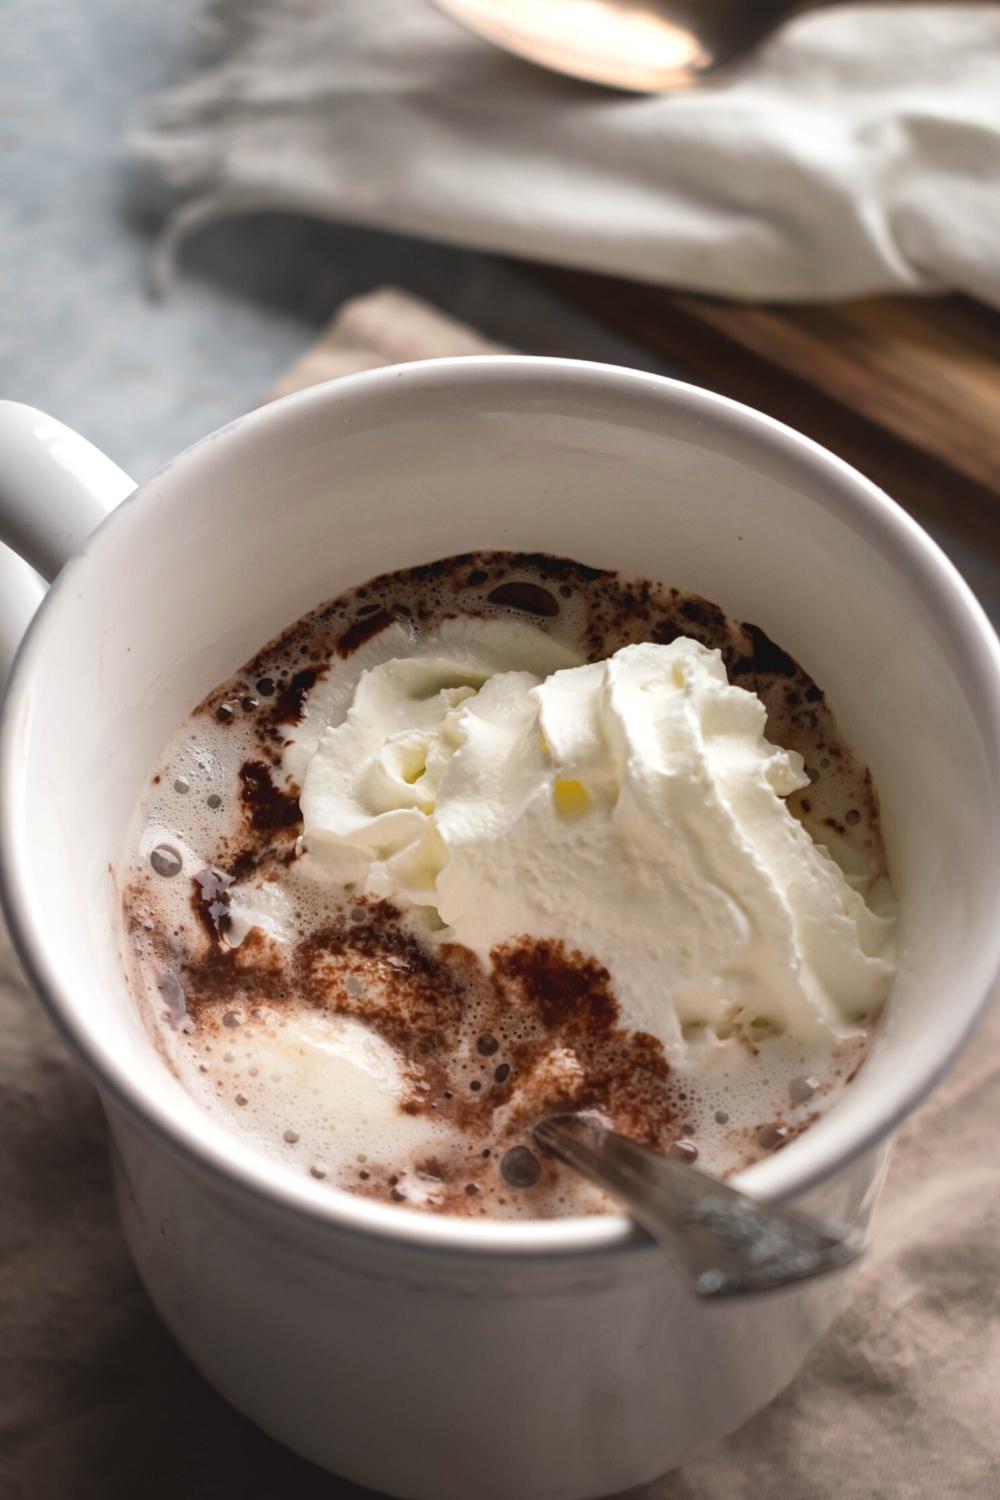 A white mug filled with hot chocolate and some whip cream on top with a spoon submerged in it.